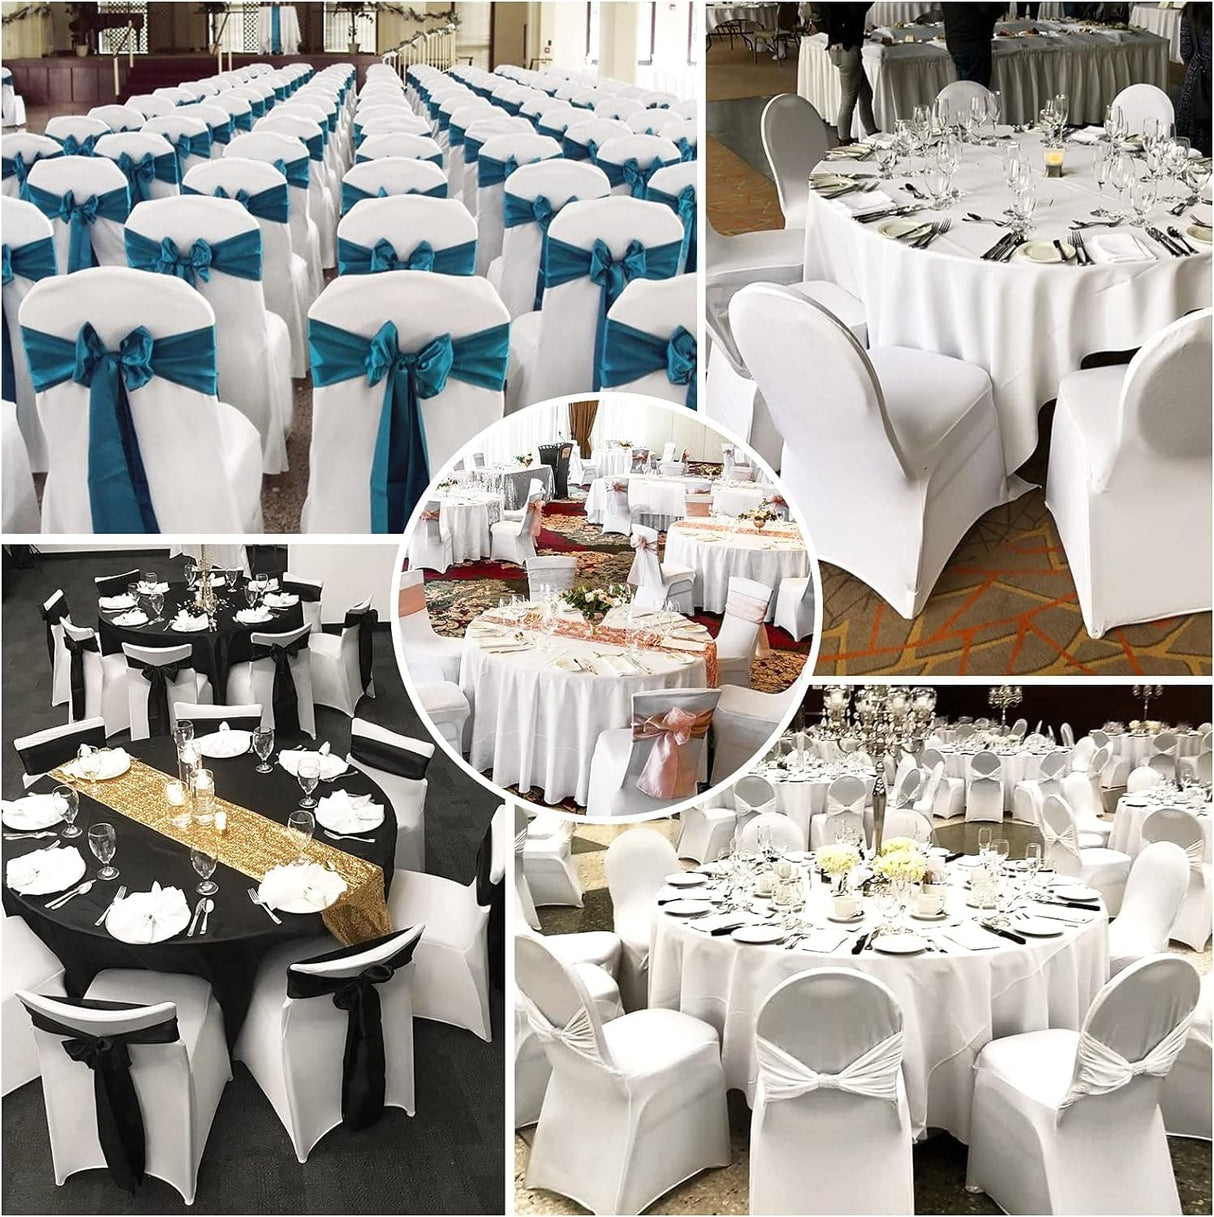 10pcs Chair Covers  Polyester Spandex Lycra Stretch Chair Cover Dining Room Wedding Chair Covers Universal Washable Protective Chair Covers for Wedding Party Banquet Decoration Covers